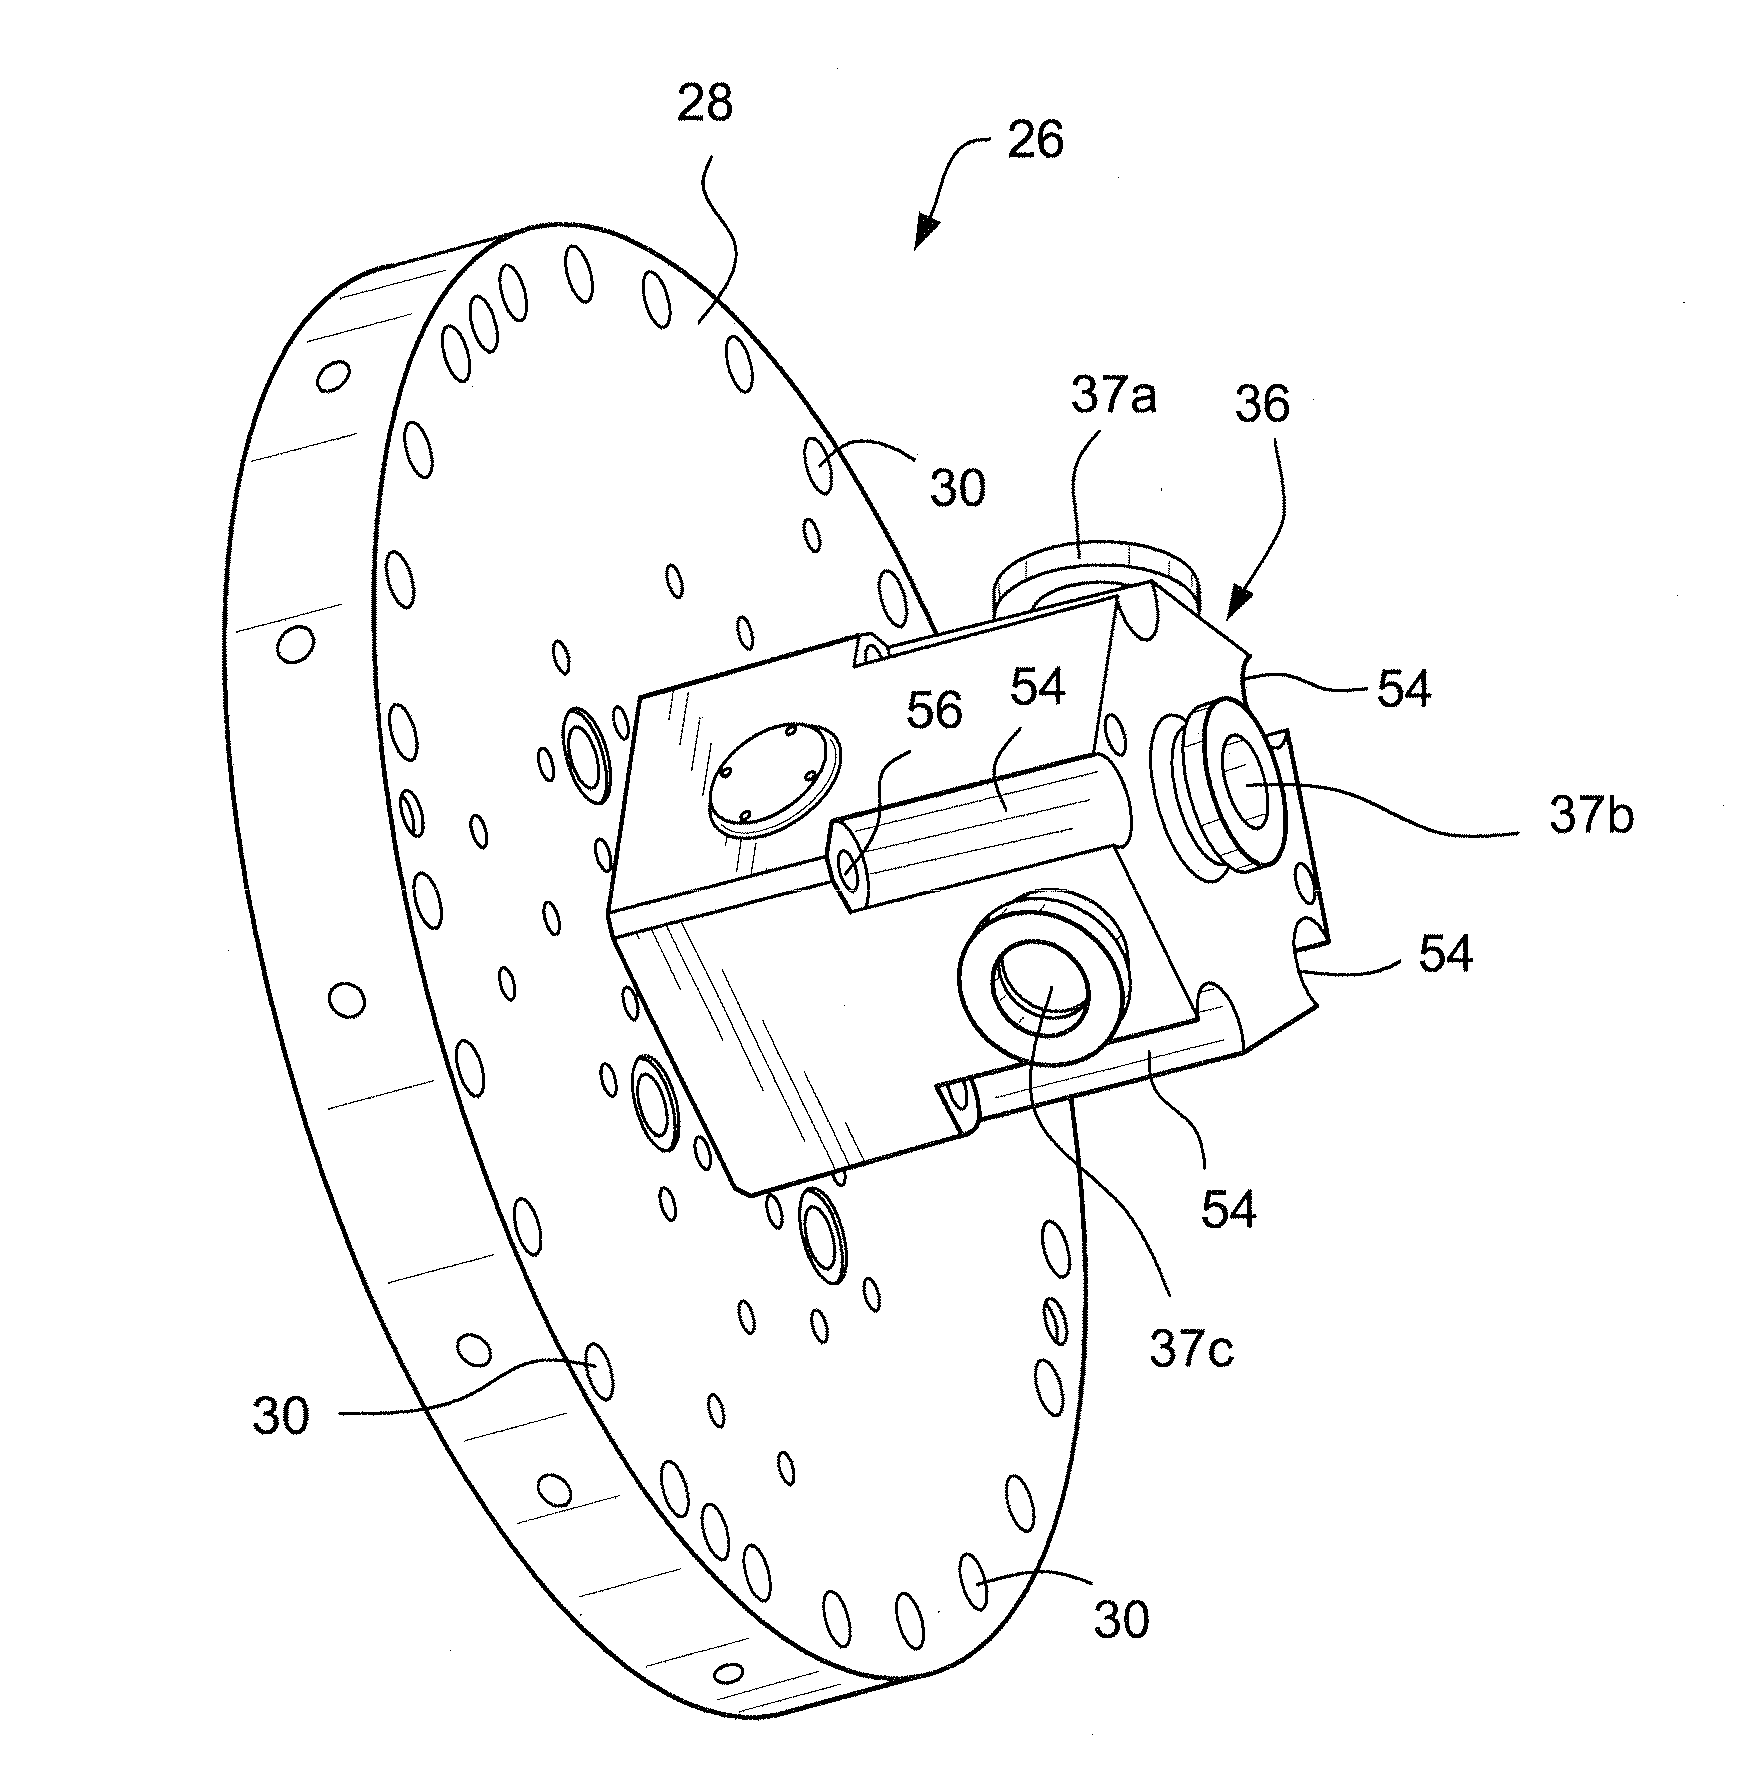 Gas turbine combustor endcover assembly with integrated flow restrictor and manifold seal